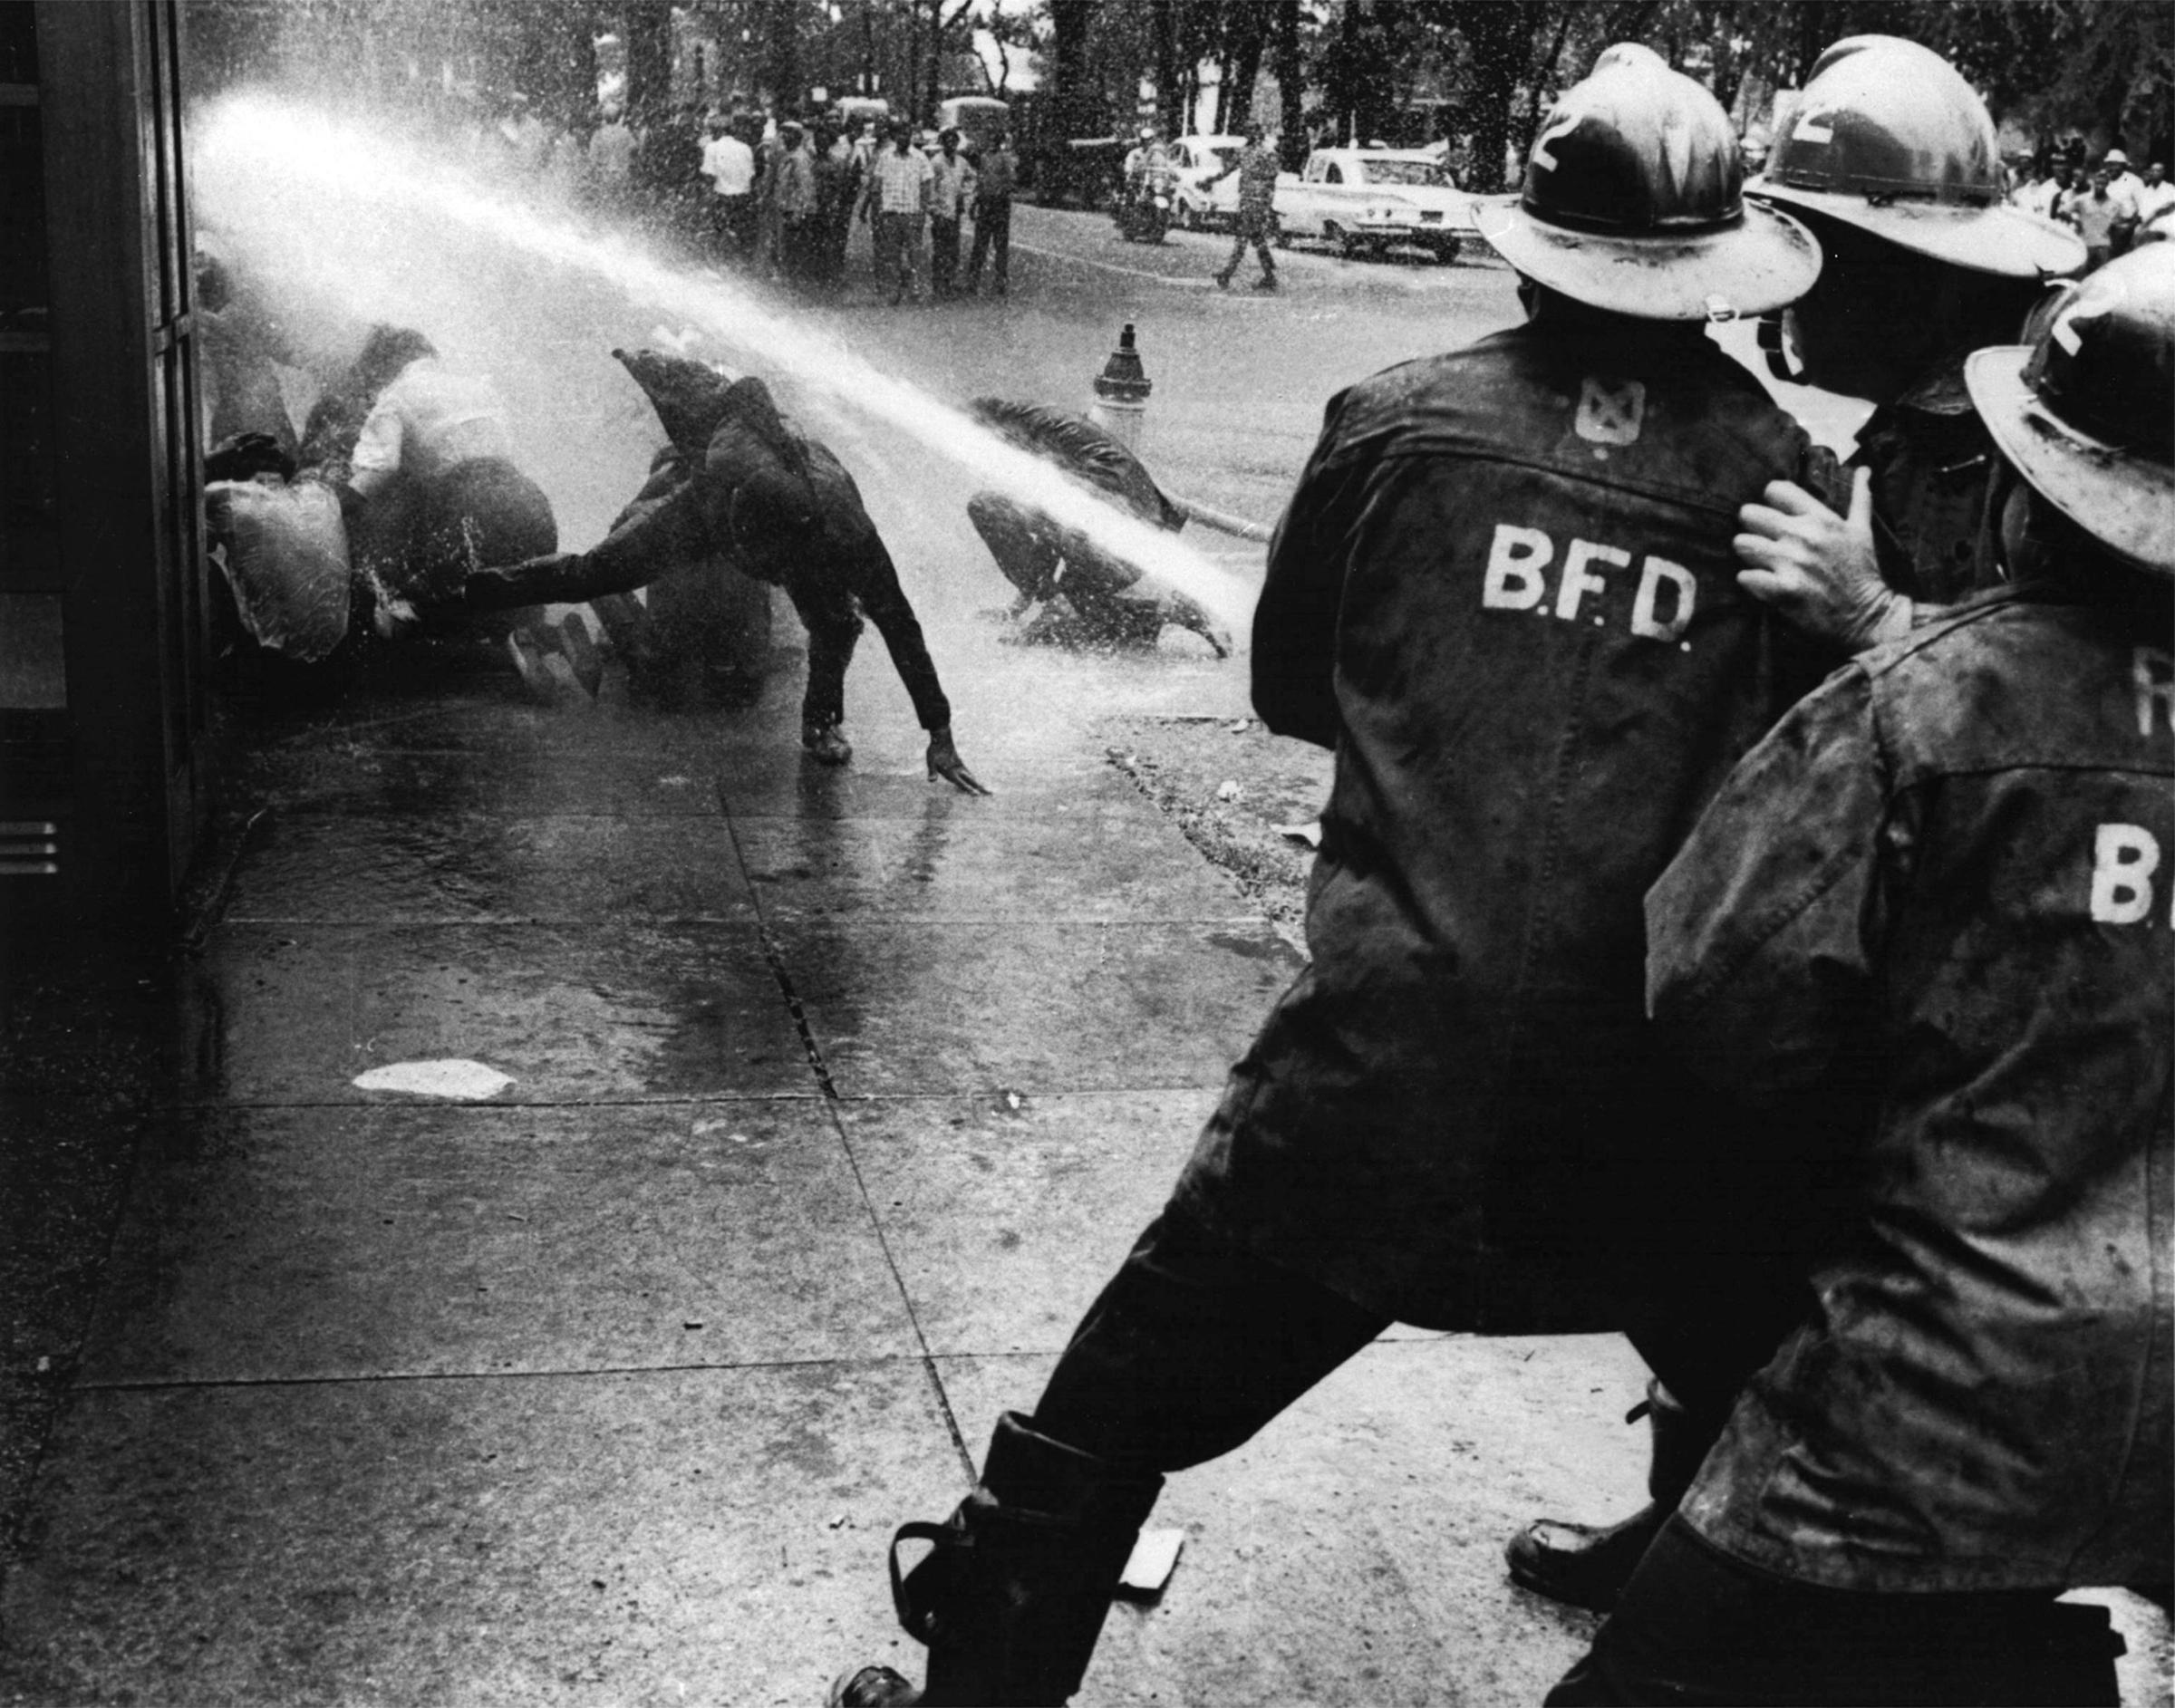 Firefighters turn their hoses full force on civil rights demonstrators in Birmingham, Ala., on July 15, 1963